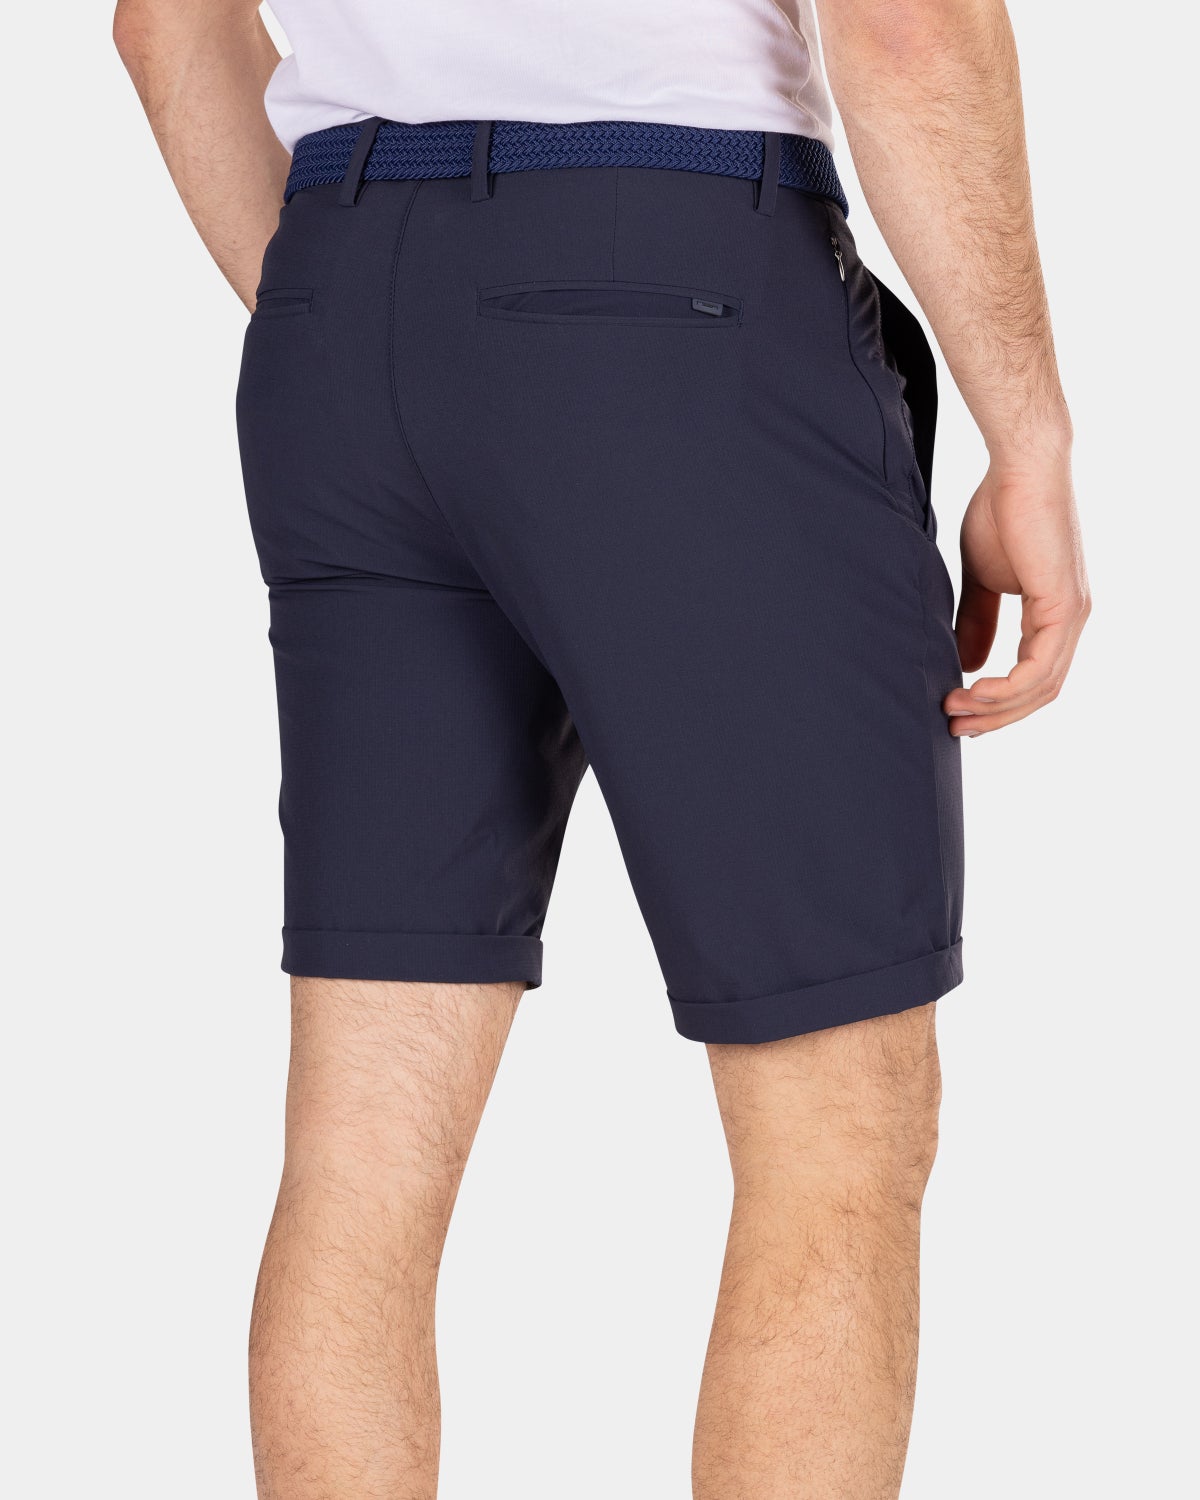 Dressed shorts - Traditional Navy